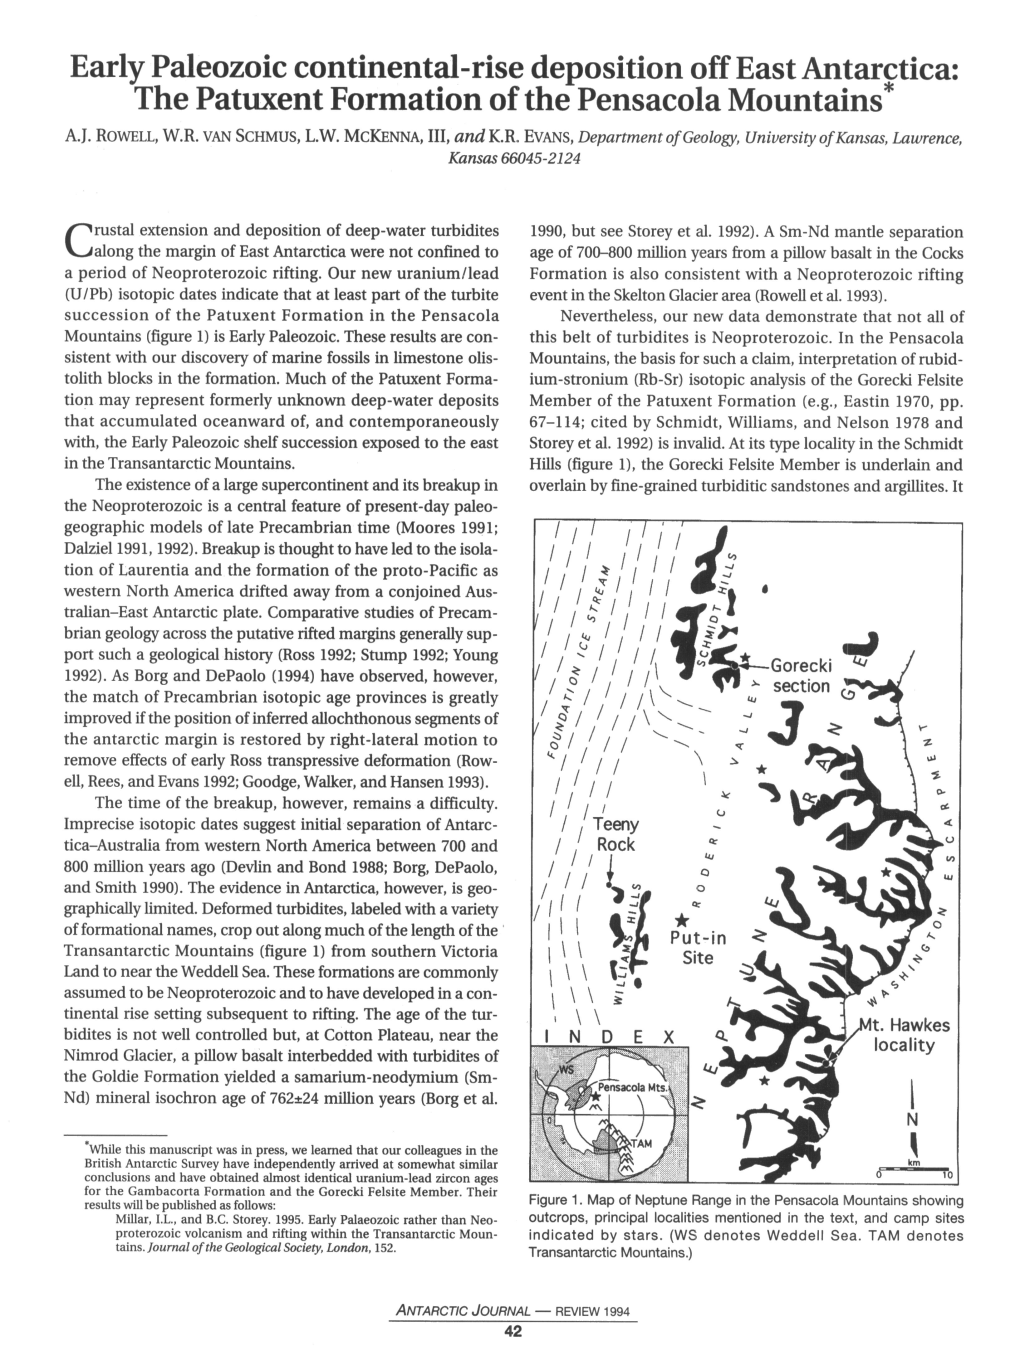 Early Paleozoic Continental-Rise Deposition Off East Antarctica: the Patuxent Formation of the Pensacola Mountains A.J